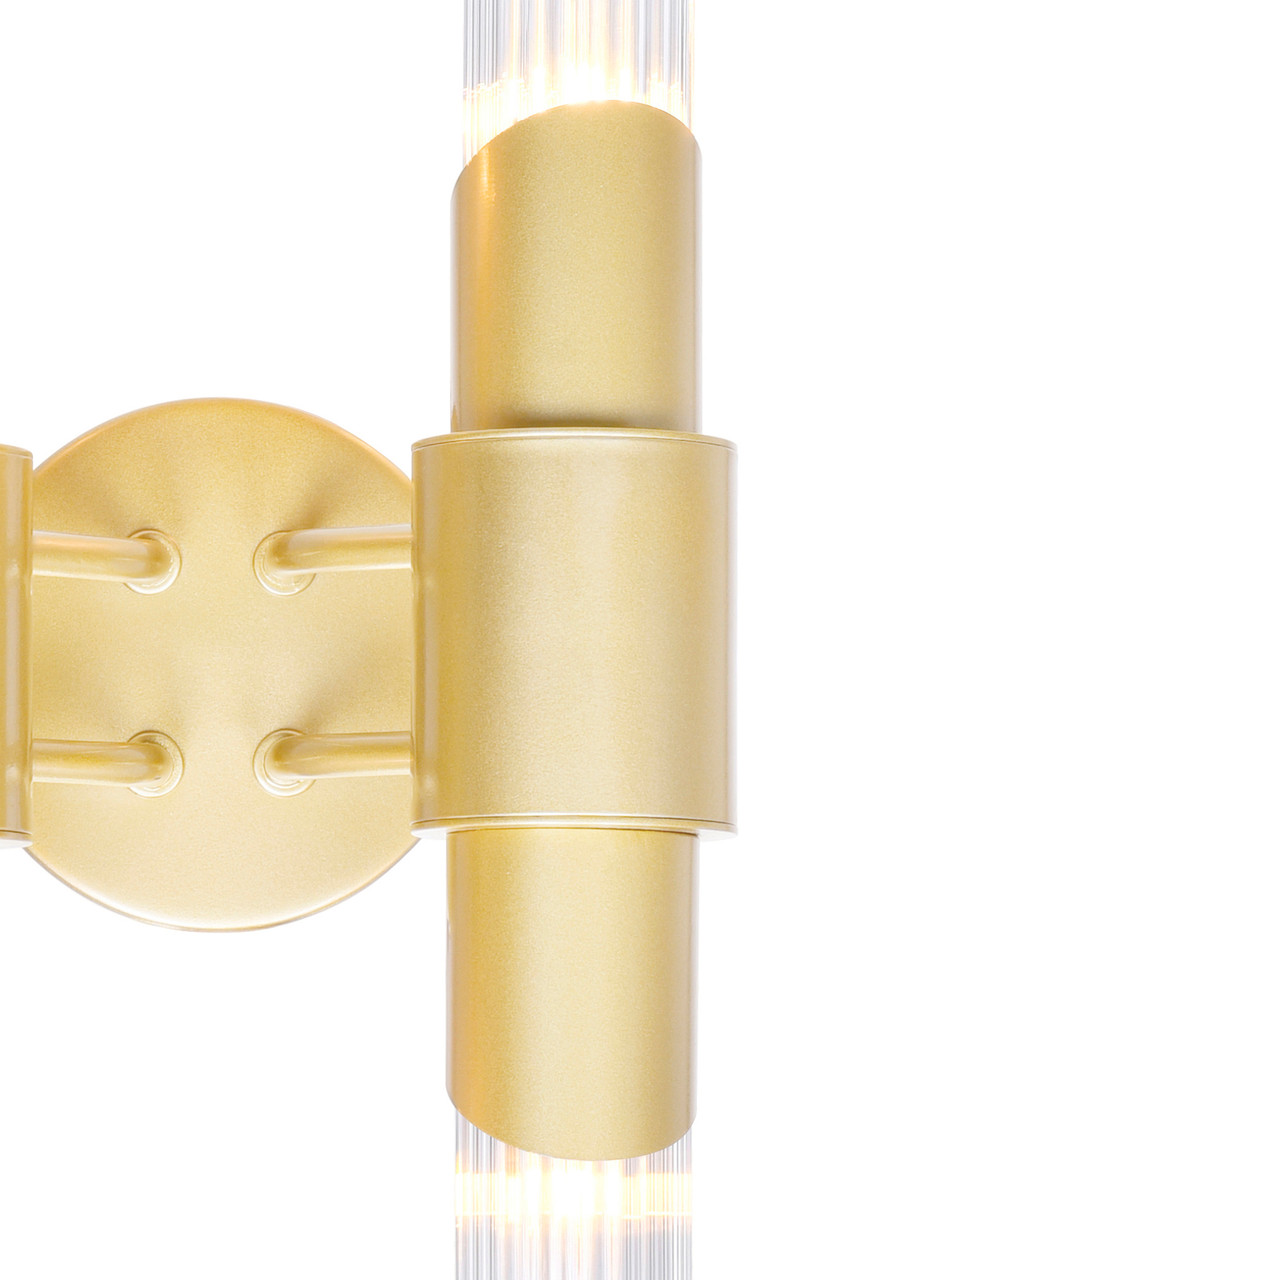 CWI LIGHTING 1269W8-4-602 4 Light Wall Sconce with Satin Gold finish